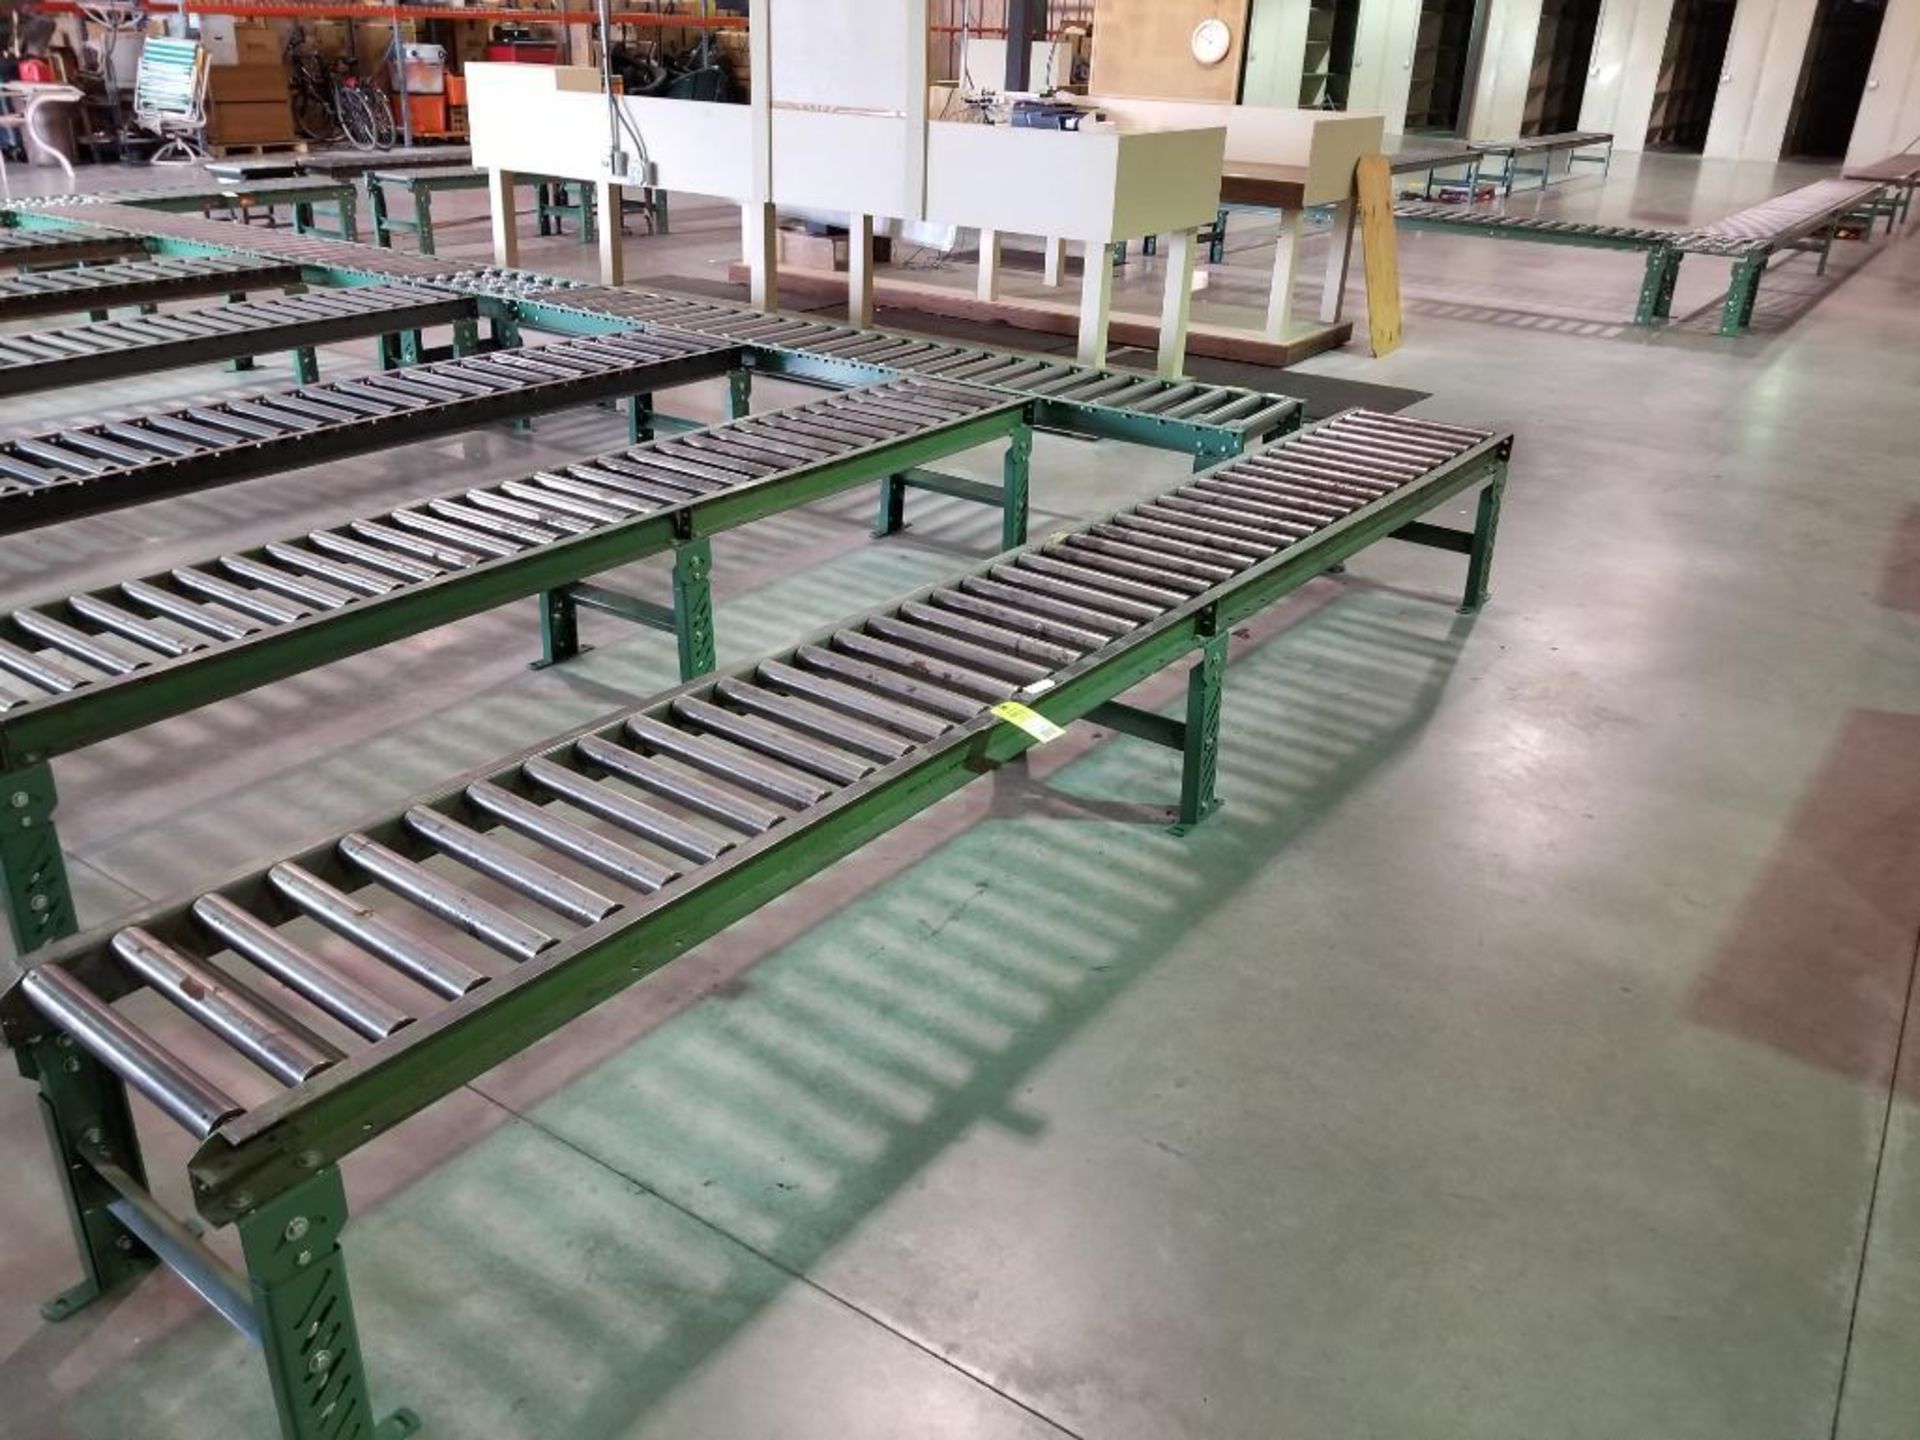 13ft roller conveyor section. 20in wide by 20in tall. (legs are adjustable to change height)